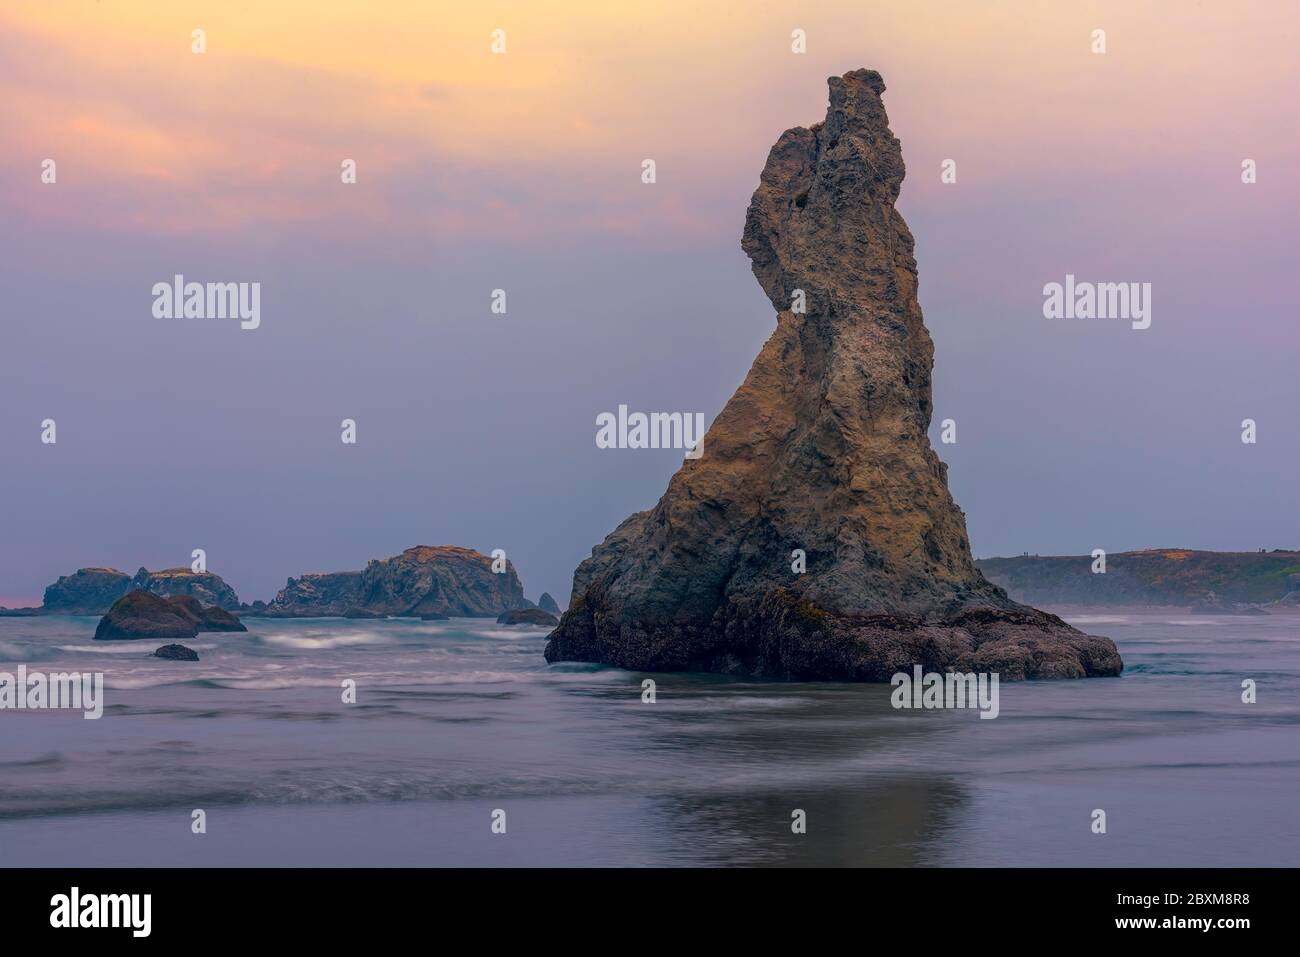 Long exposure image of waves breaking on the beach near Howling Dog Rock at sunset in Bandon, Oregon. Stock Photo